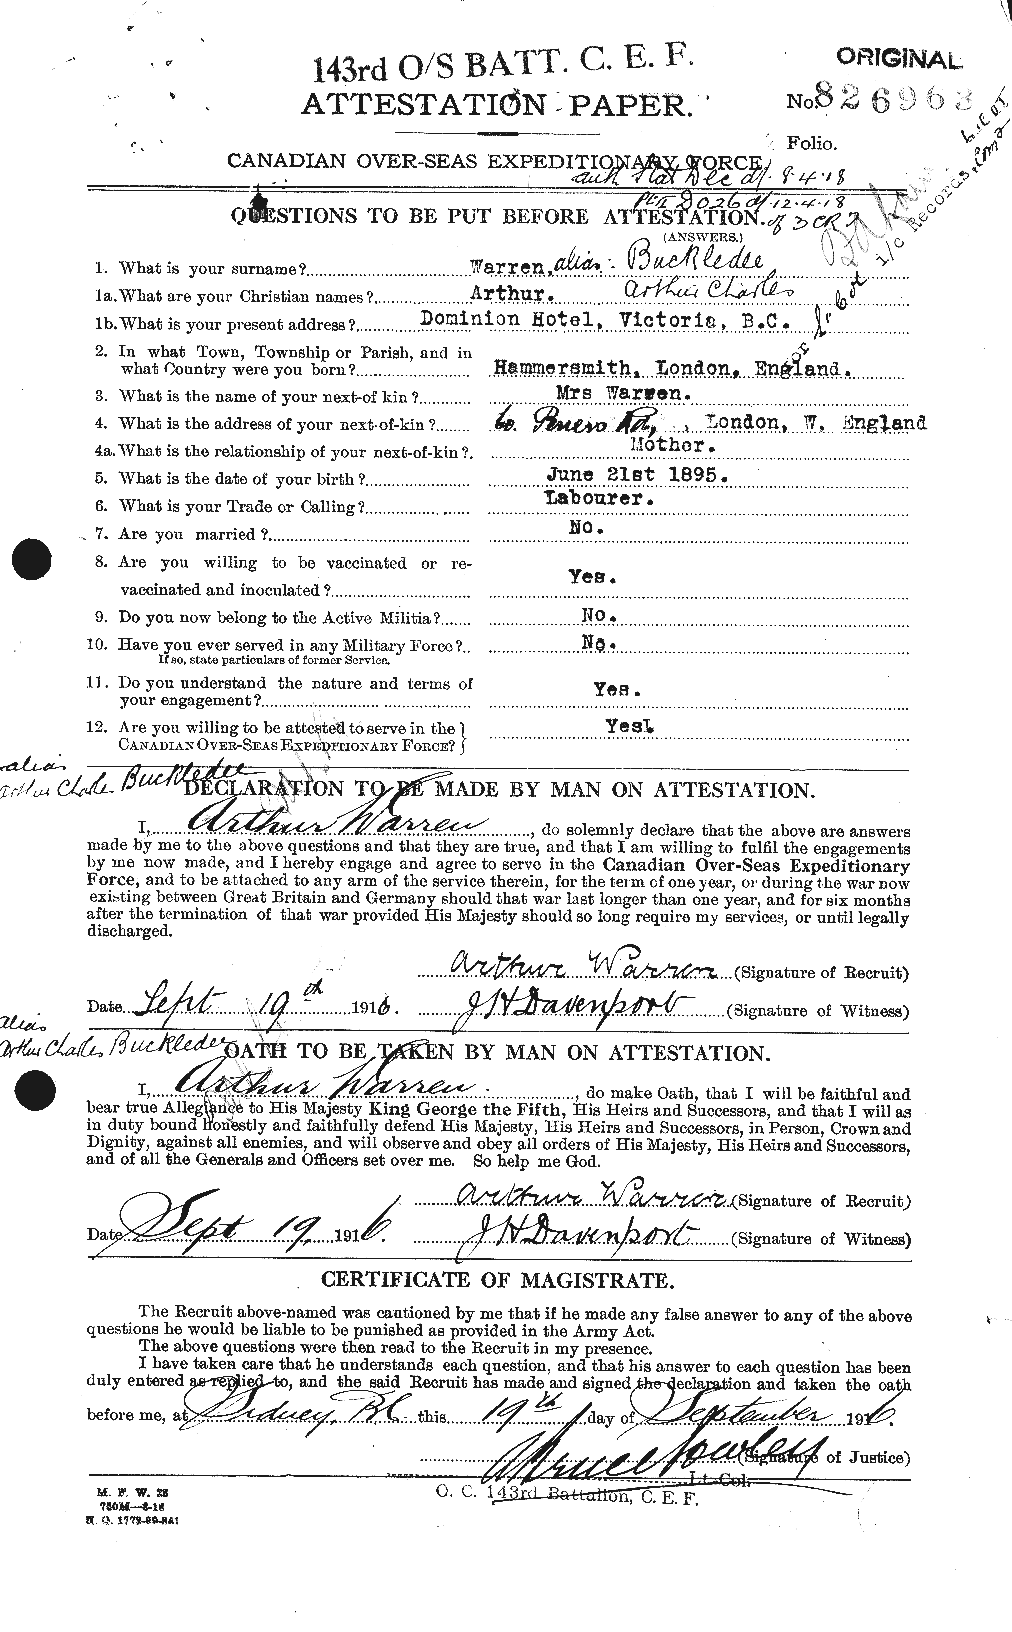 Personnel Records of the First World War - CEF 270040a